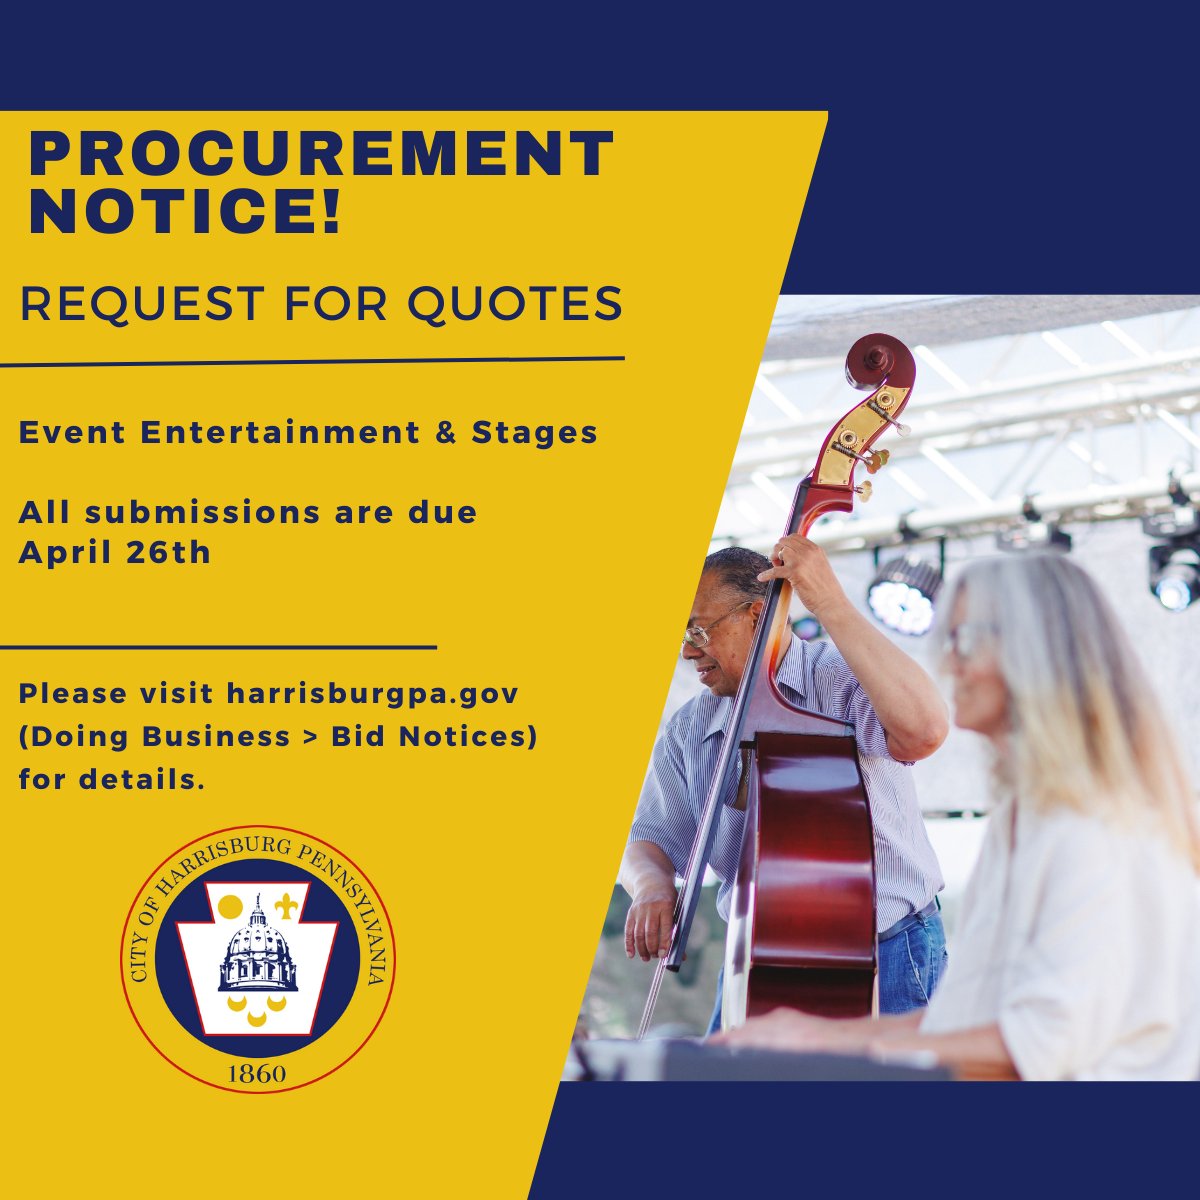 The City is currently seeking Event Entertainment & Stages quotes. More details can be found at visit harrisburgpa.gov/financial-mana…